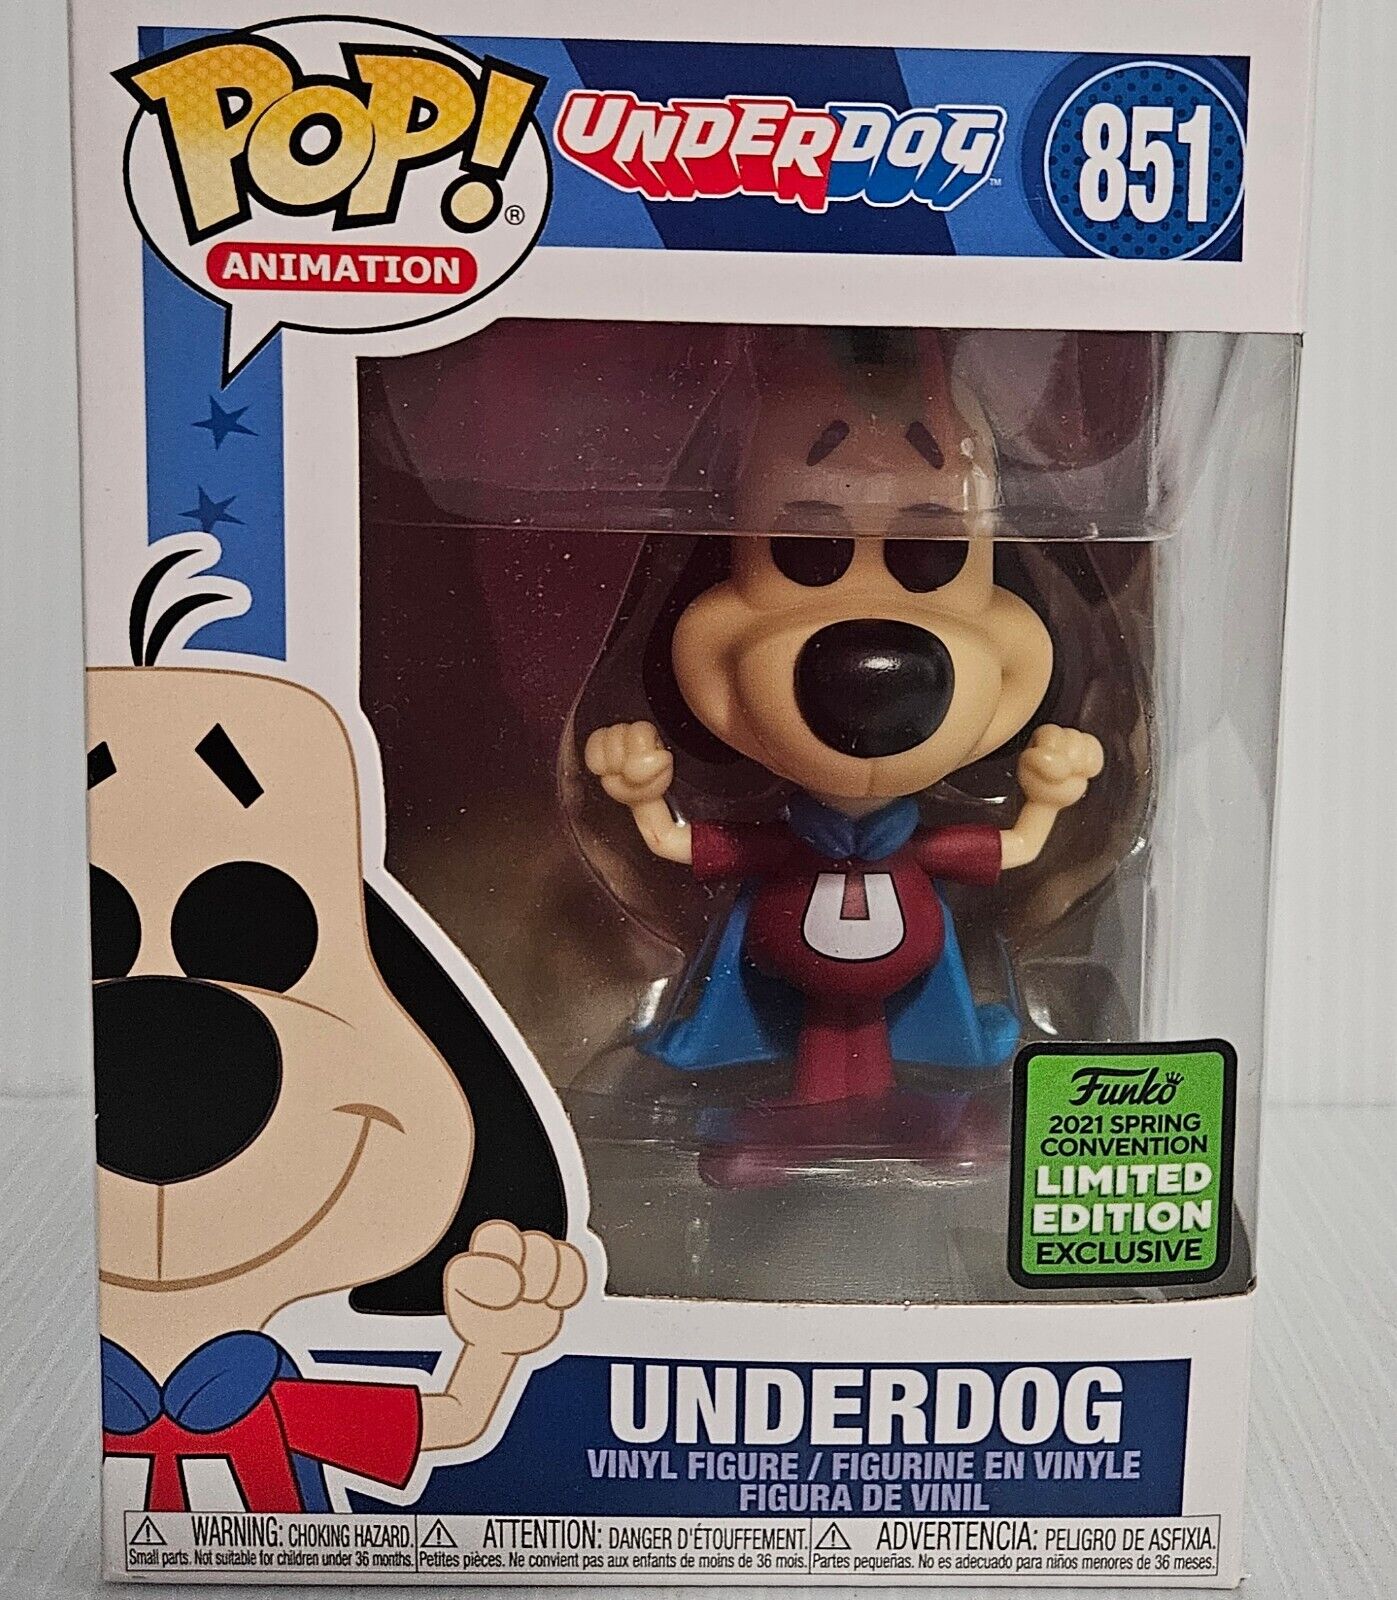 Funko POP Animation Underdog #851 ECCC Spring Convention Excl. Limited Edition 